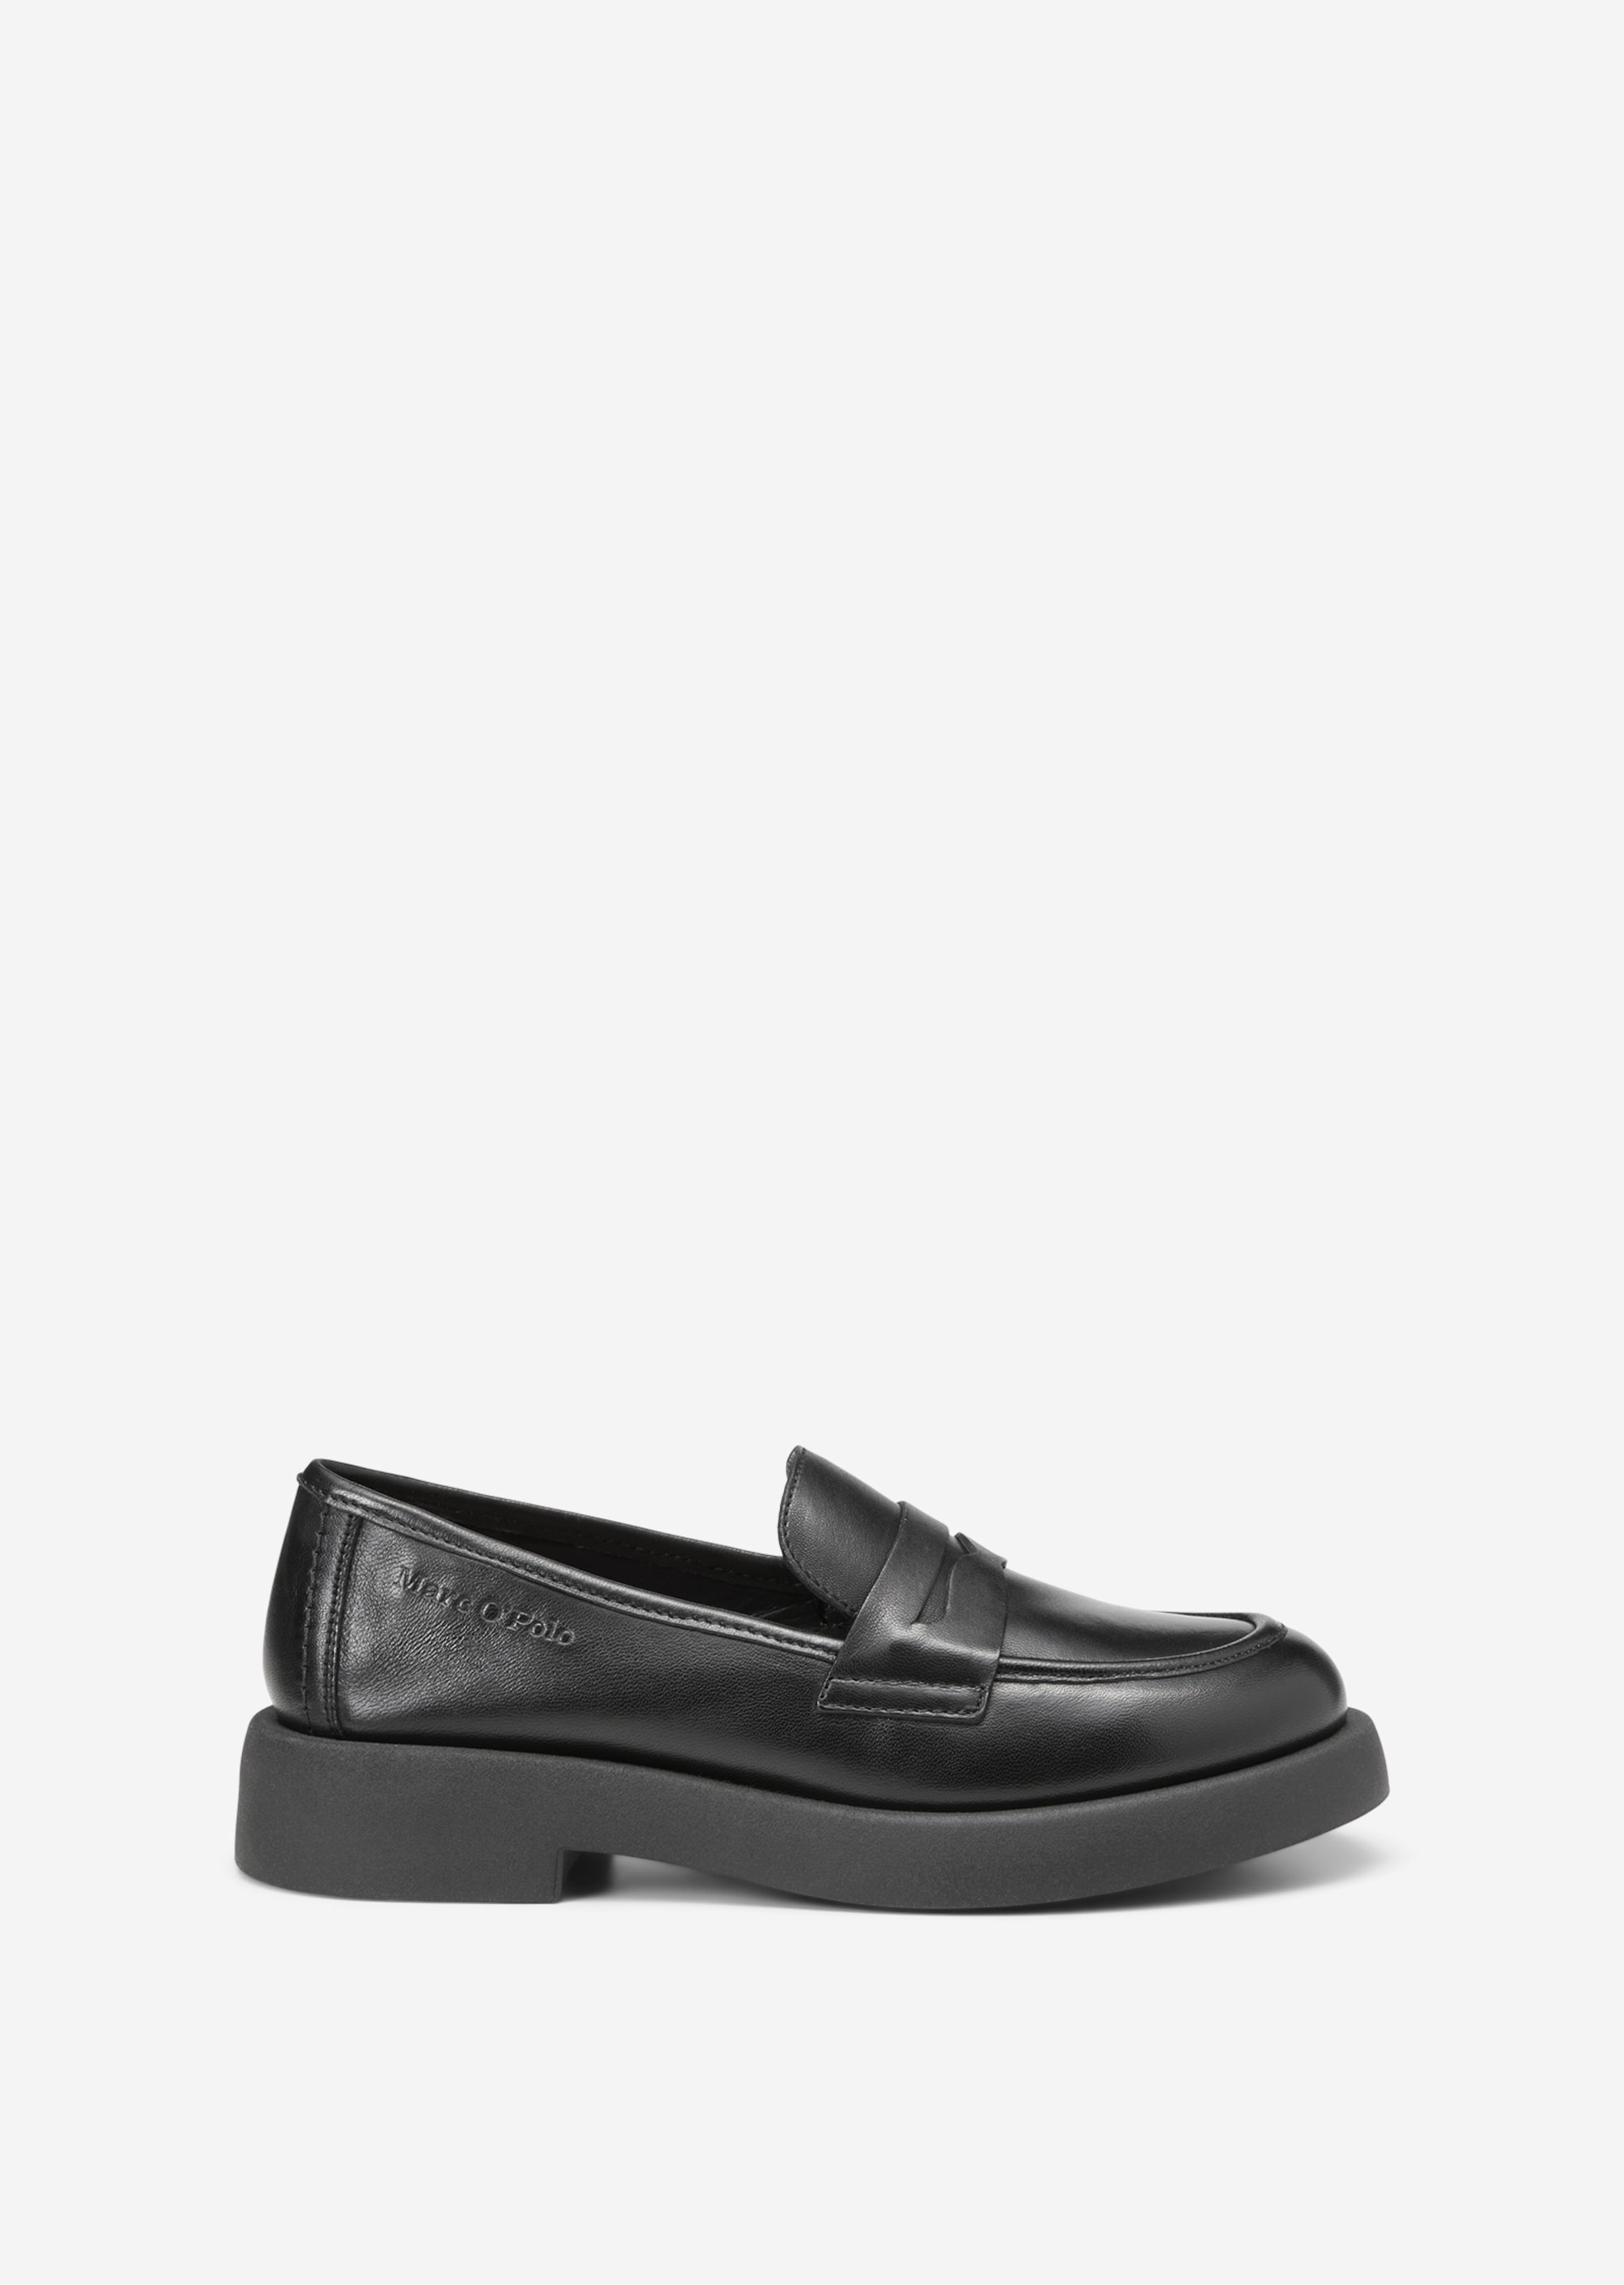 Penny loafers made from soft calfskin - black | Loafers | MARC O’POLO